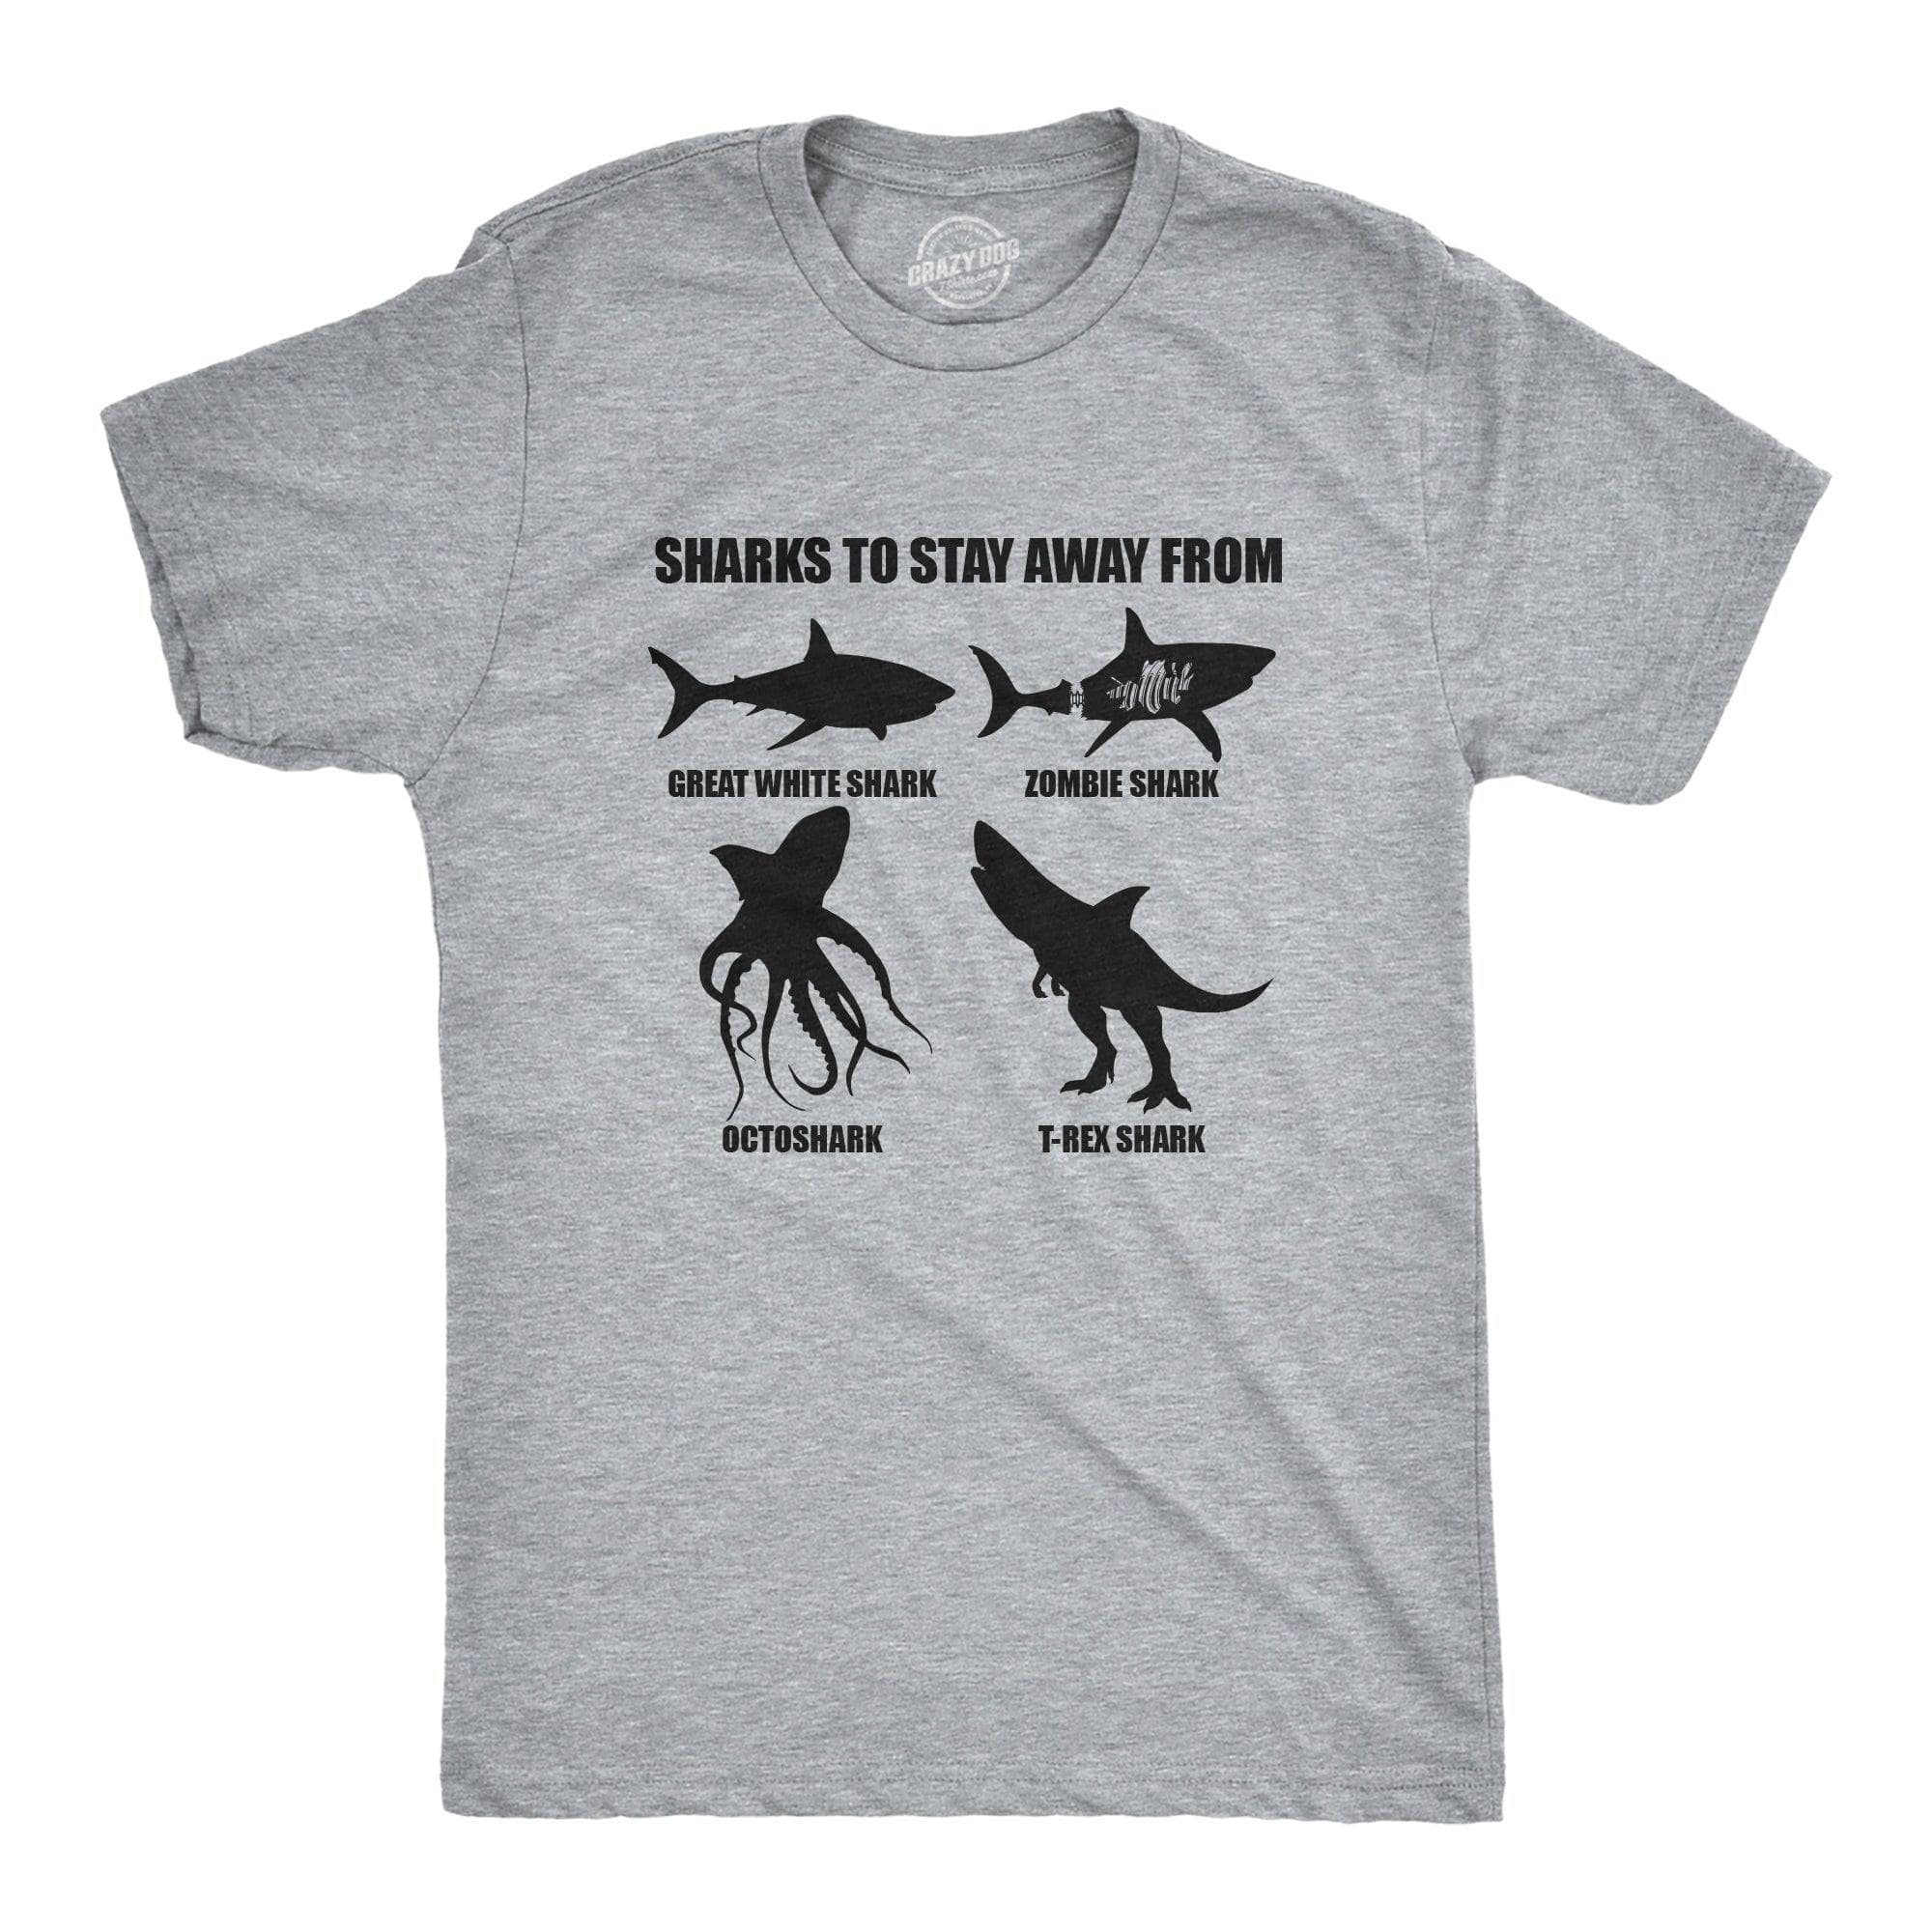 Sharks To Stay Away From Men's Tshirt  -  Crazy Dog T-Shirts